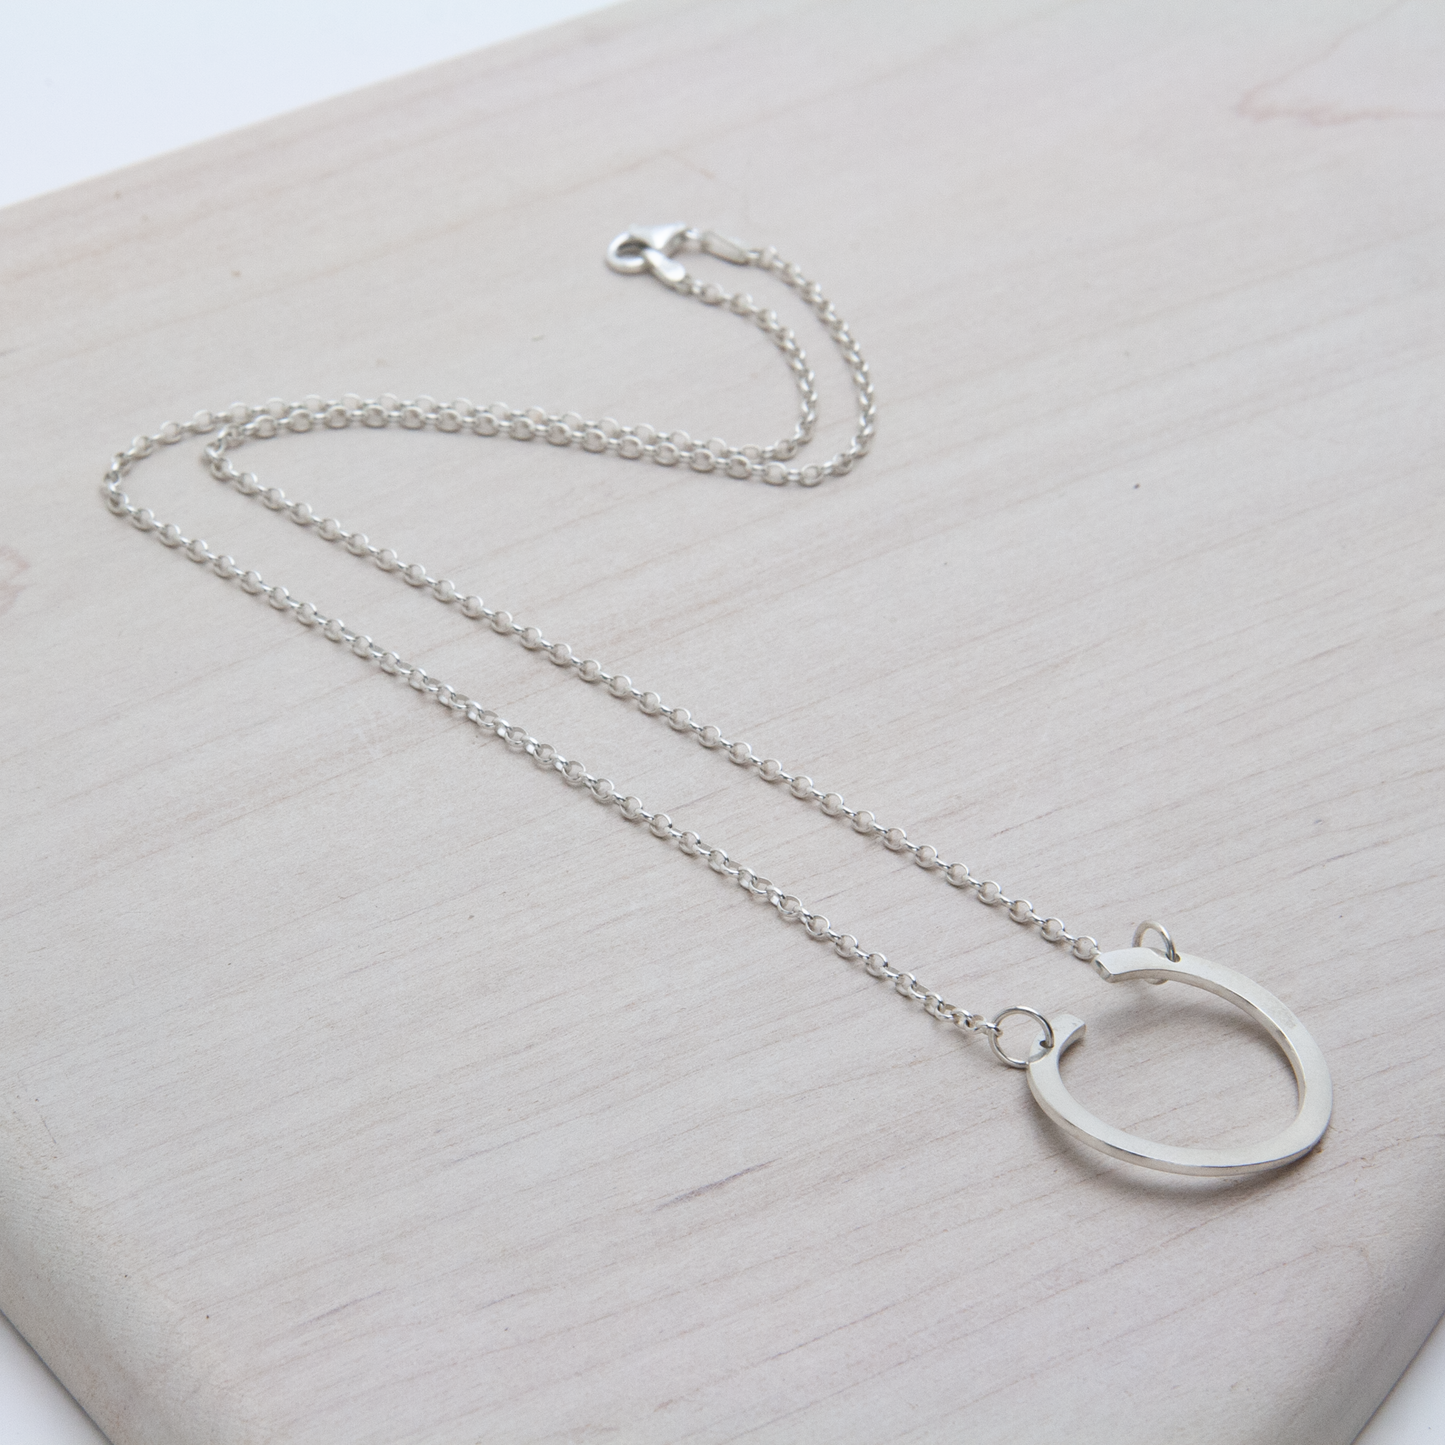 MOTION NECKLACE - JewellerAJGreen